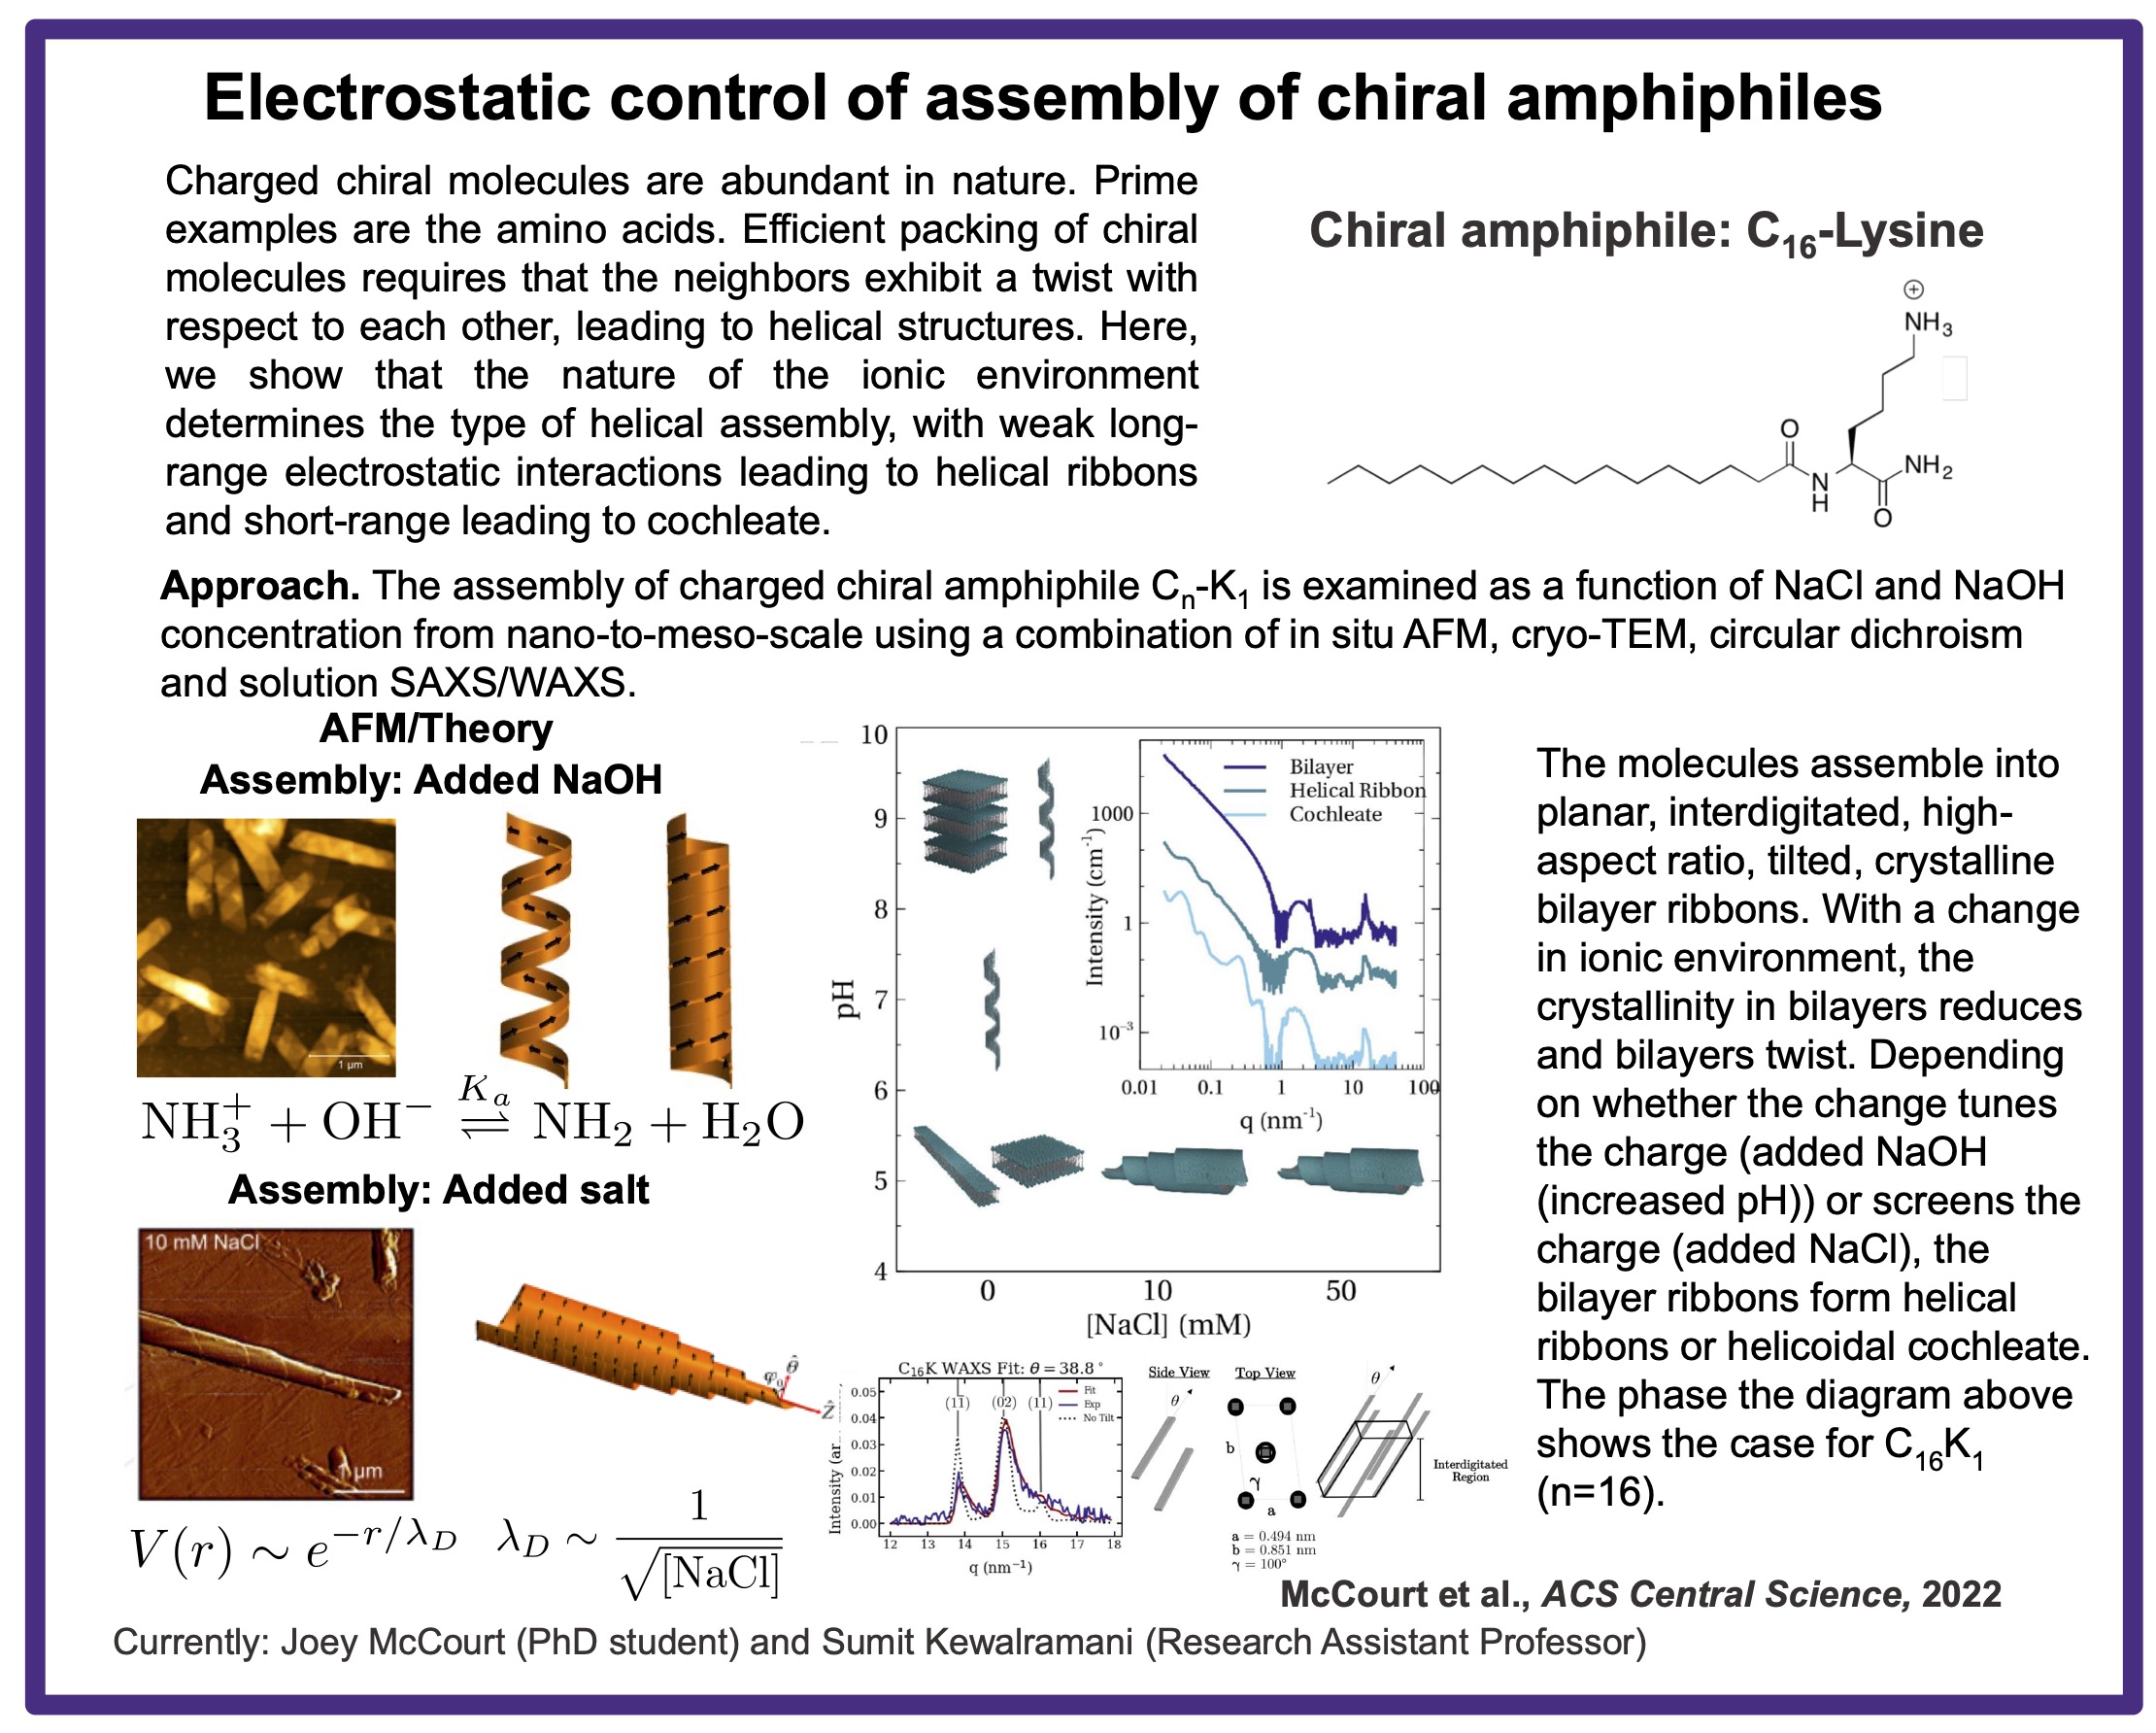 Electrostatic control of assembly of chiral amphiphiles. Charged chiral molecules are abundant in nature. Prime examples are the amino acids. Efficient packing of chiral molecules requires that the neighbors exhibit a twist with respect to each other, leading to helical structures. Here, we show that the nature of the ionic environment determines the type of helical assembly, with weak long-range electrostatic interactions leading to helical ribbons and short-range leading to cochleate. Figure: Chiral amphiphile C-16 Lysine. Approach: The assembly of charged chiral amphiphile C-n K-1 is examined as a function of sodium chloride and sodium hydroxide concentration from nano to meso scale using a combination of in-situ AFM, cryo-TEM, circular dichroism and solution SAXS/WAXS. The molecules assemble into planar, interdigitated high-aspect ratio, tilted, crystalline bilayer ribbons. With a charge in ionic environment, the crystallinity in bilayers reduces and bilayers twist. Depending on whether the change tunes the charge (added sodium hydroxide (increased pH)) or screens the charge (added sodium chloride), the bilayer ribbons form helical ribbons or helicoidal cochleate. McCourt et al., ACS Central Science, 2022.